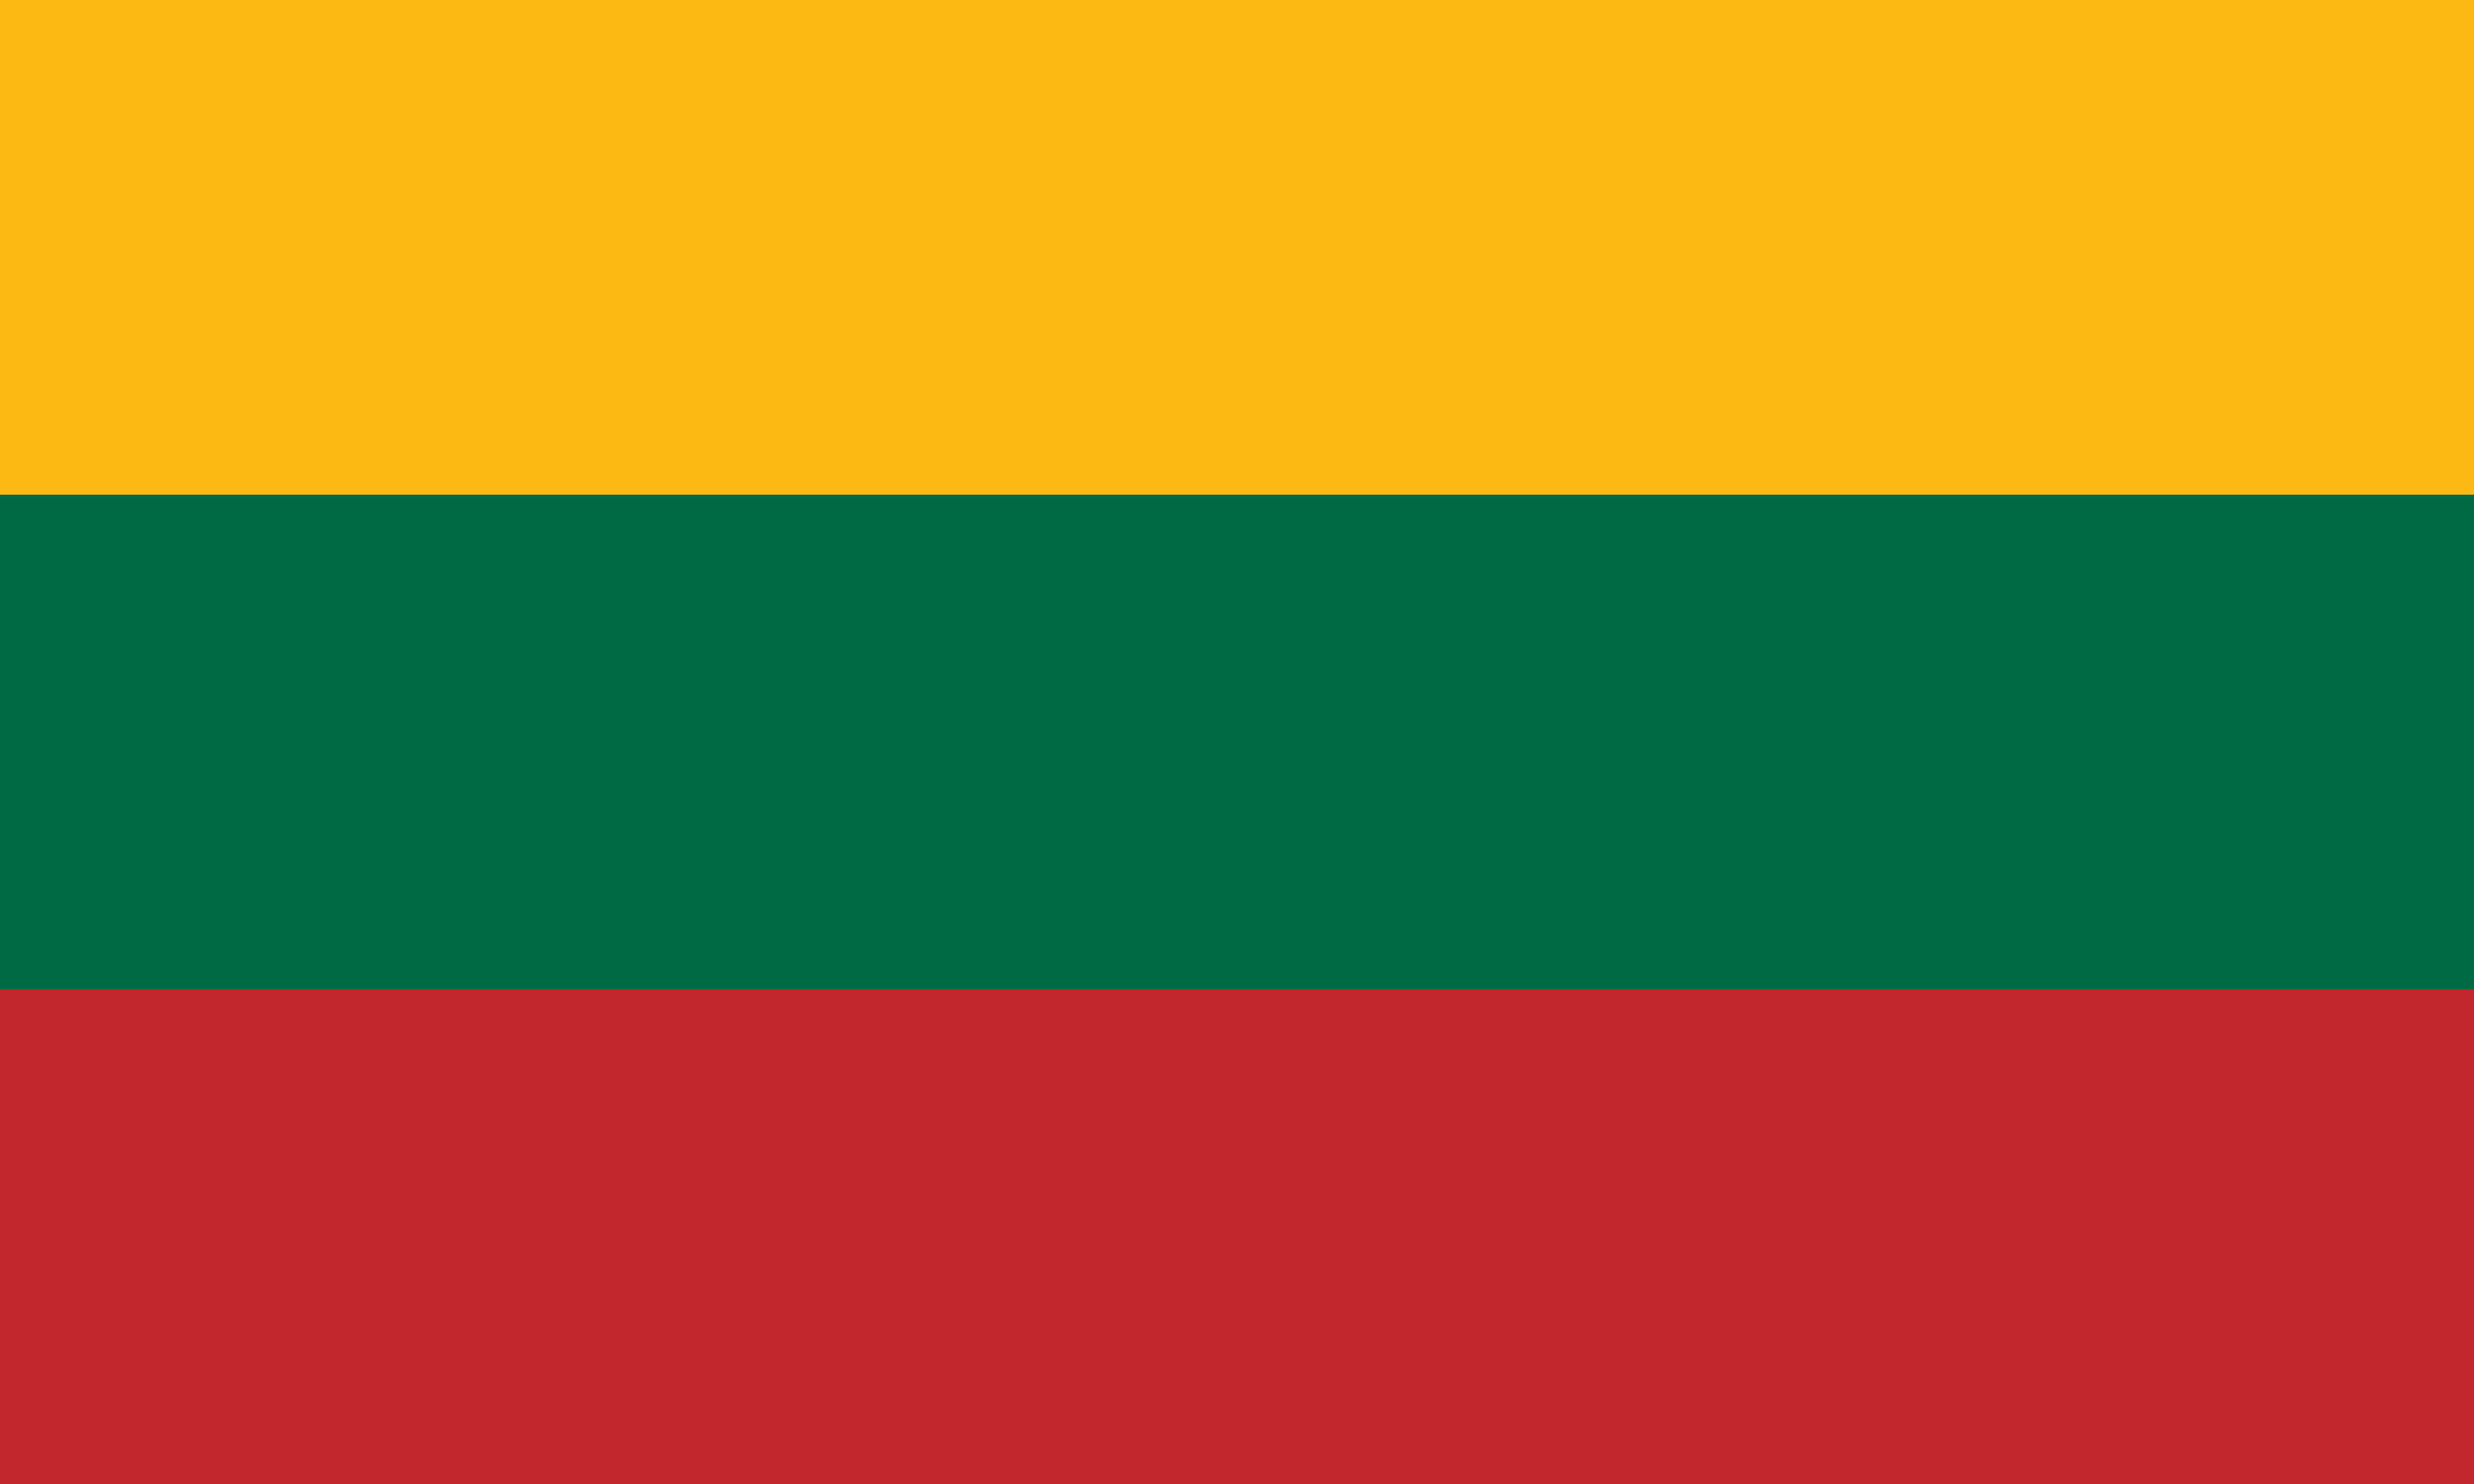 Lithuania Flag Image - Free Download